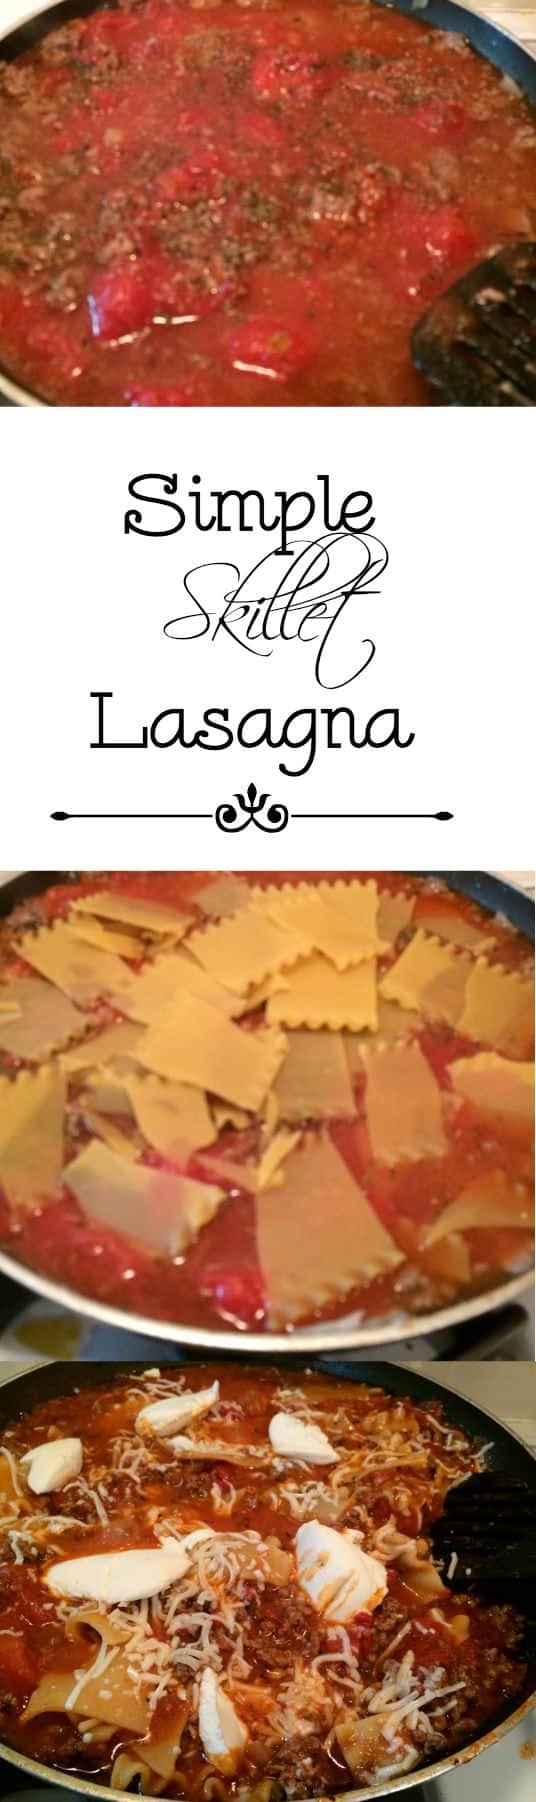 A one pot skillet lasagna recipe that is all made in one pan! A tasty dinner recipe!